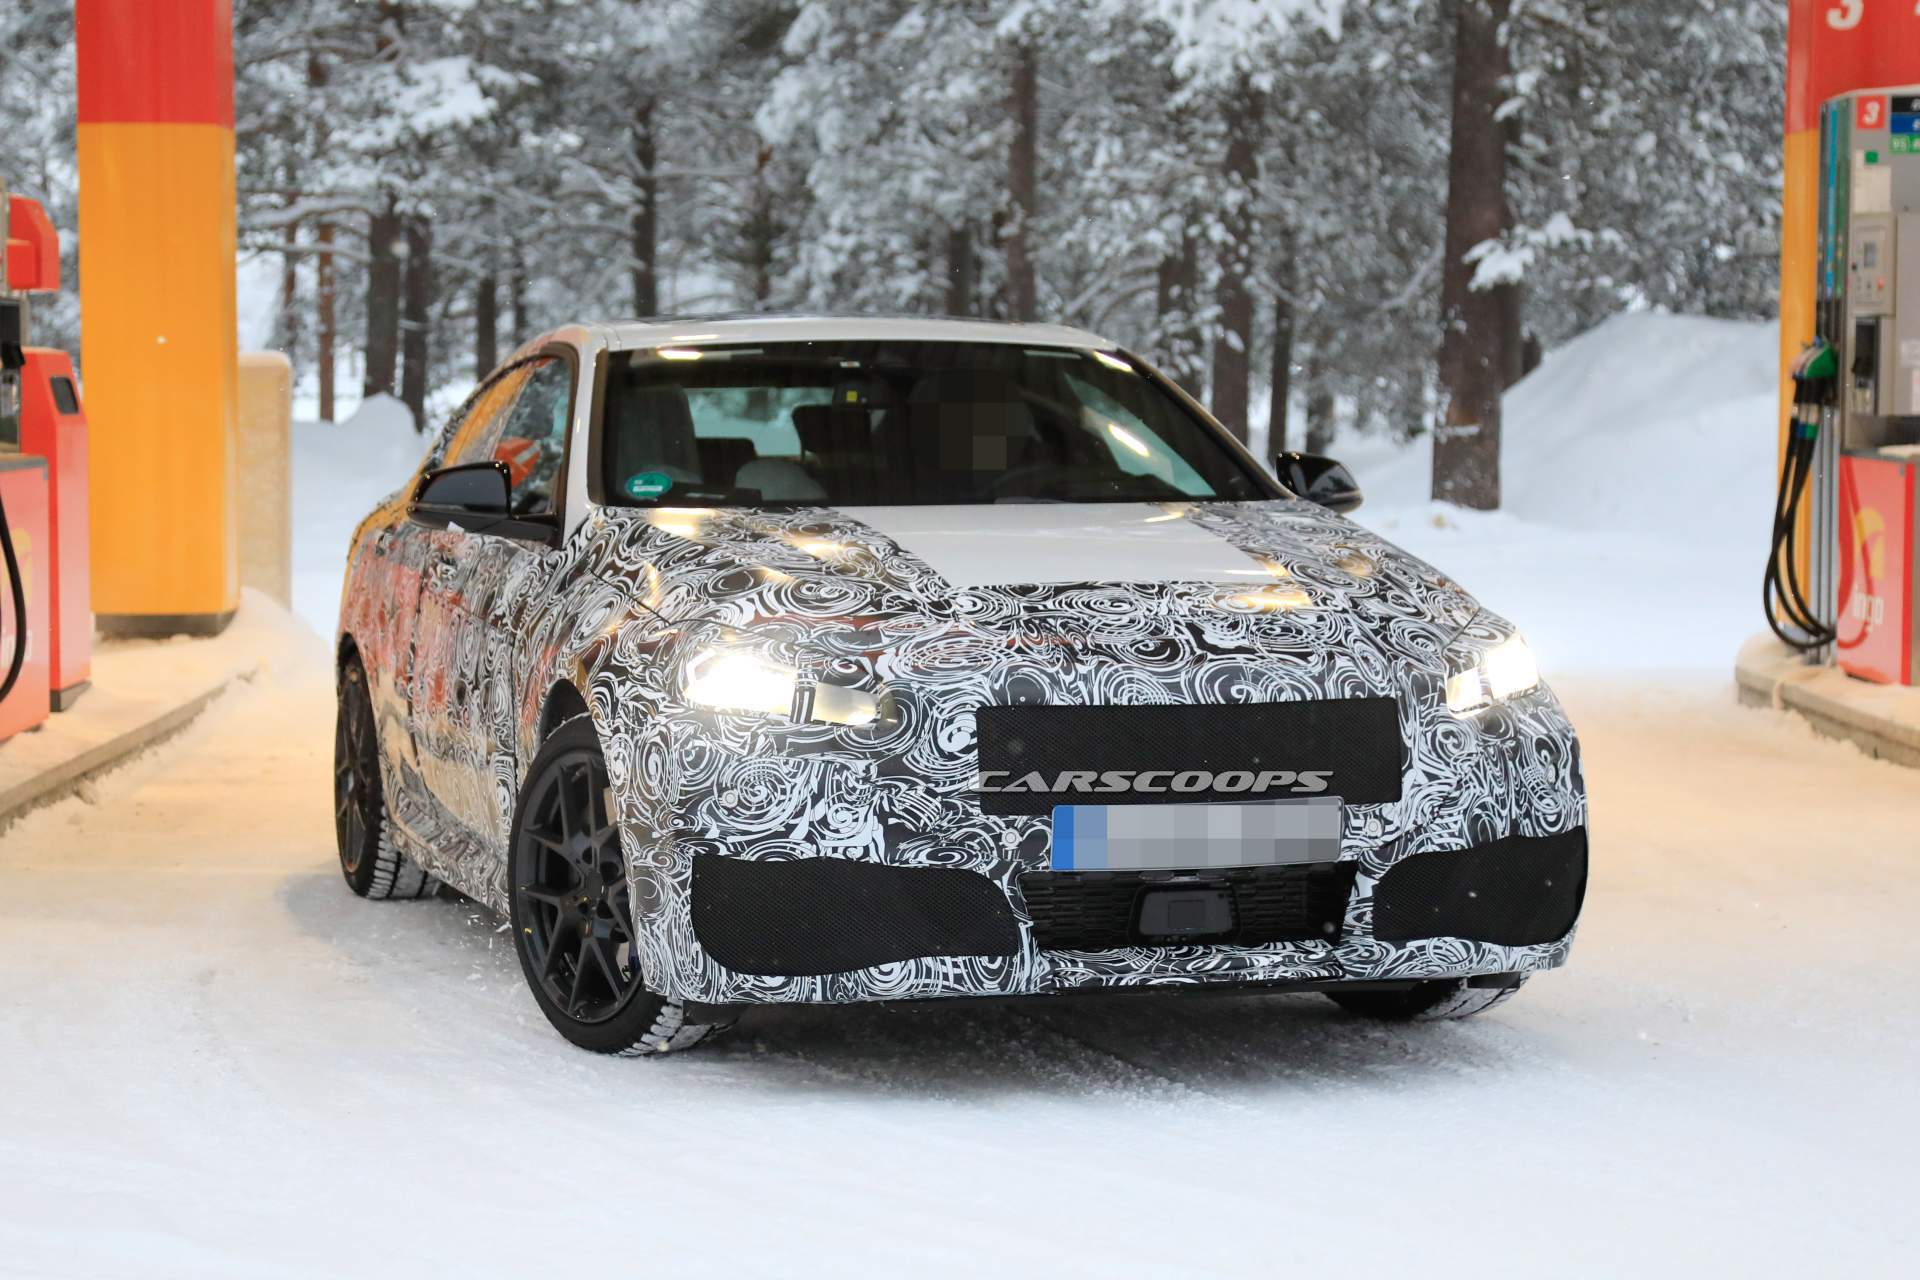 Bmw 2 Series Gran Coupe Shows Up In M240i M Performance Guise Snow Drifting Carscoops